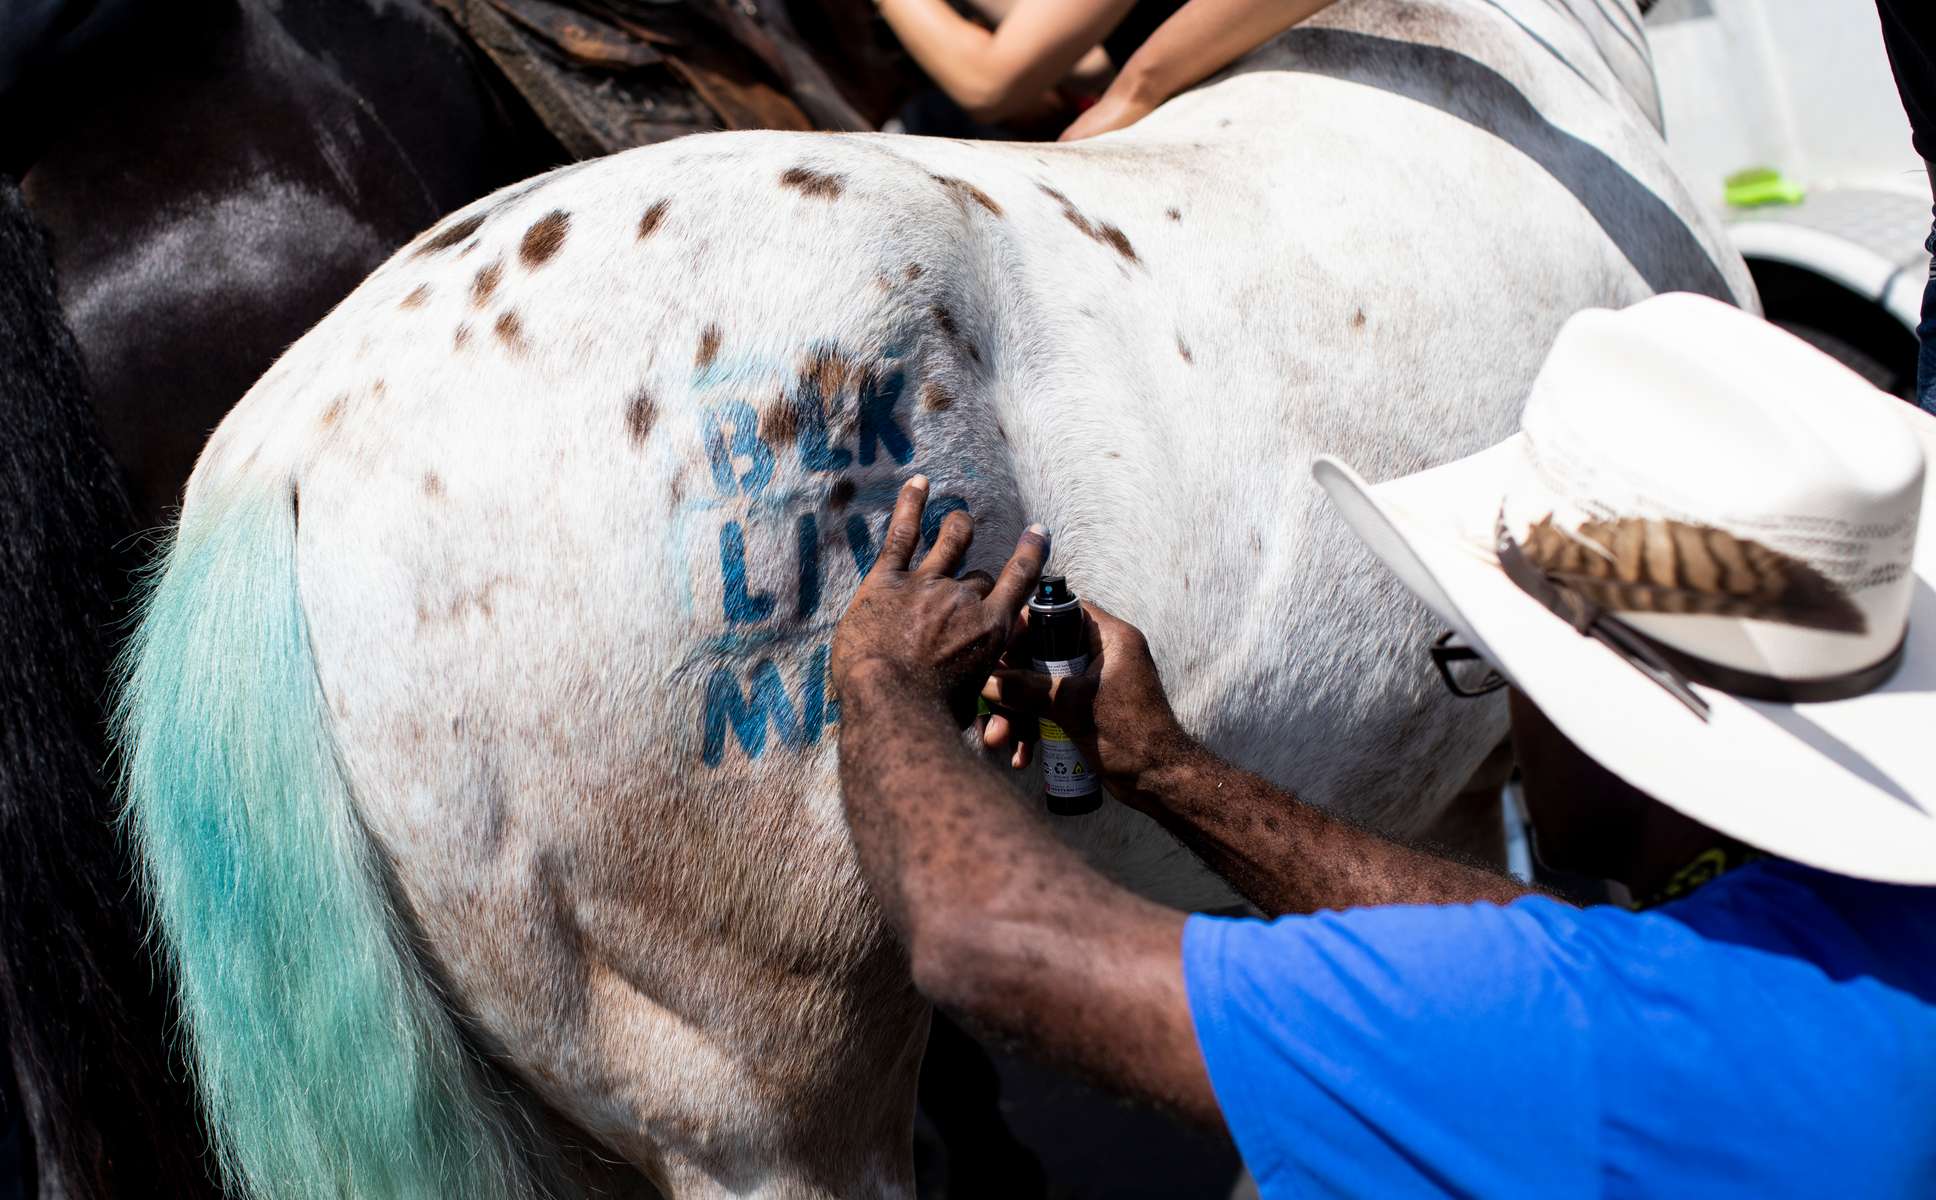 A participant prepares his horse before a {quote}peace ride{quote} for George Floyd organized by the Compton Cowboys on June 7, 2020, in Compton, California.This is the 13th day of protests since George Floyd died in Minneapolis police custody on May 25. 